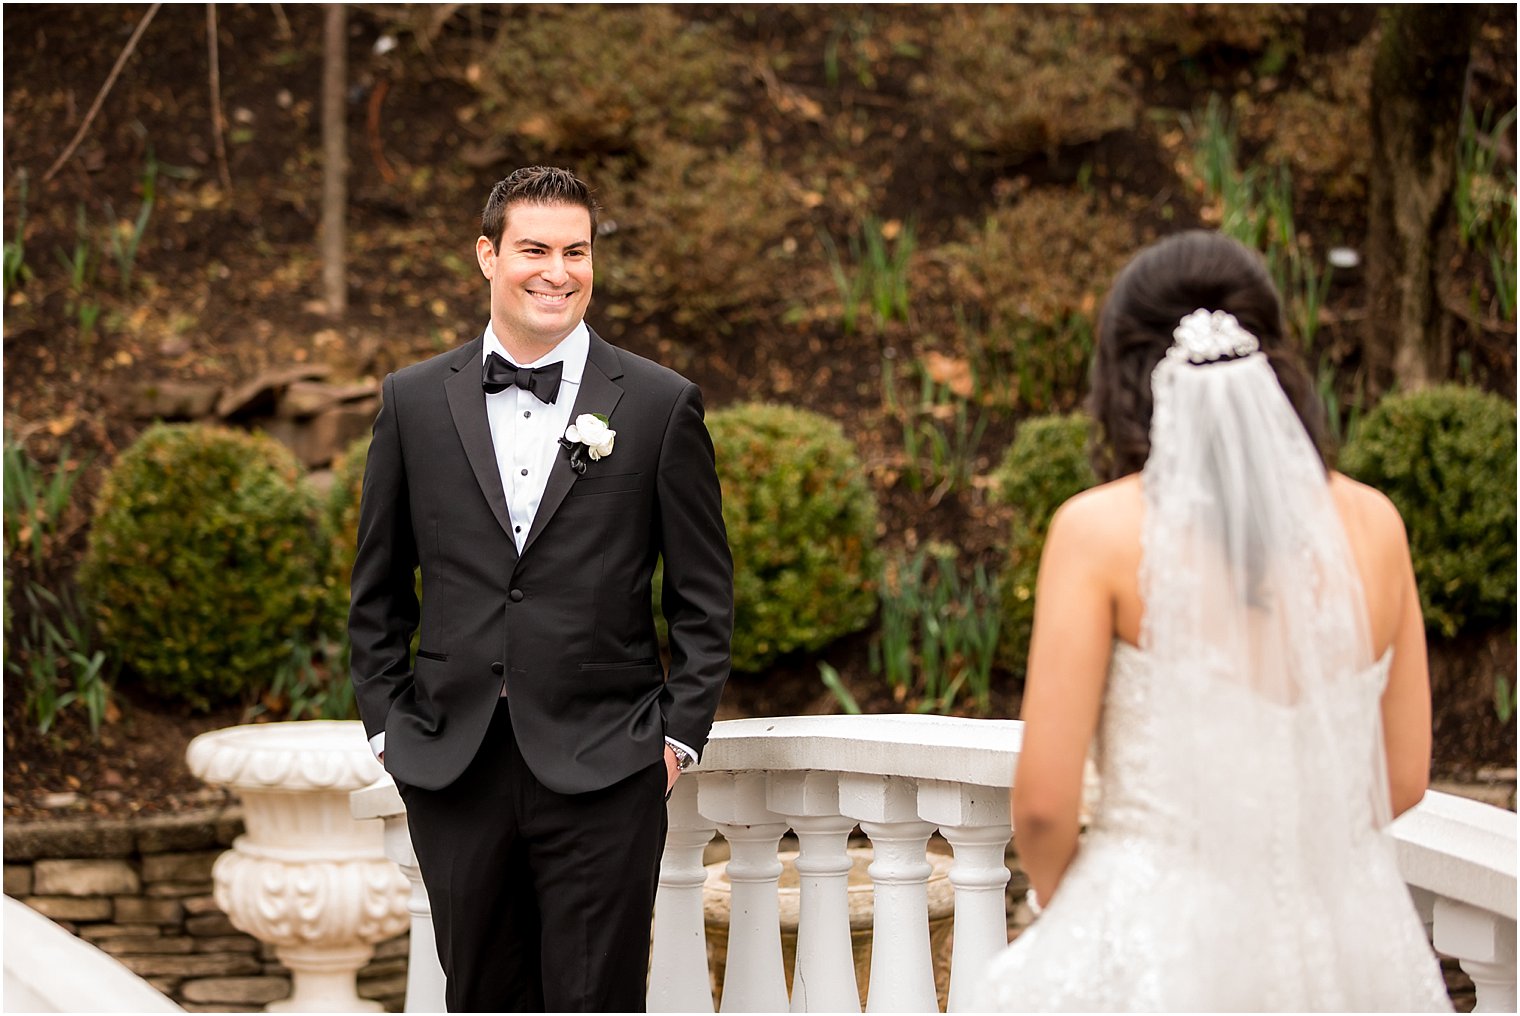 Groom's reaction at seeing his bride during first look | Photo by Idalia Photography